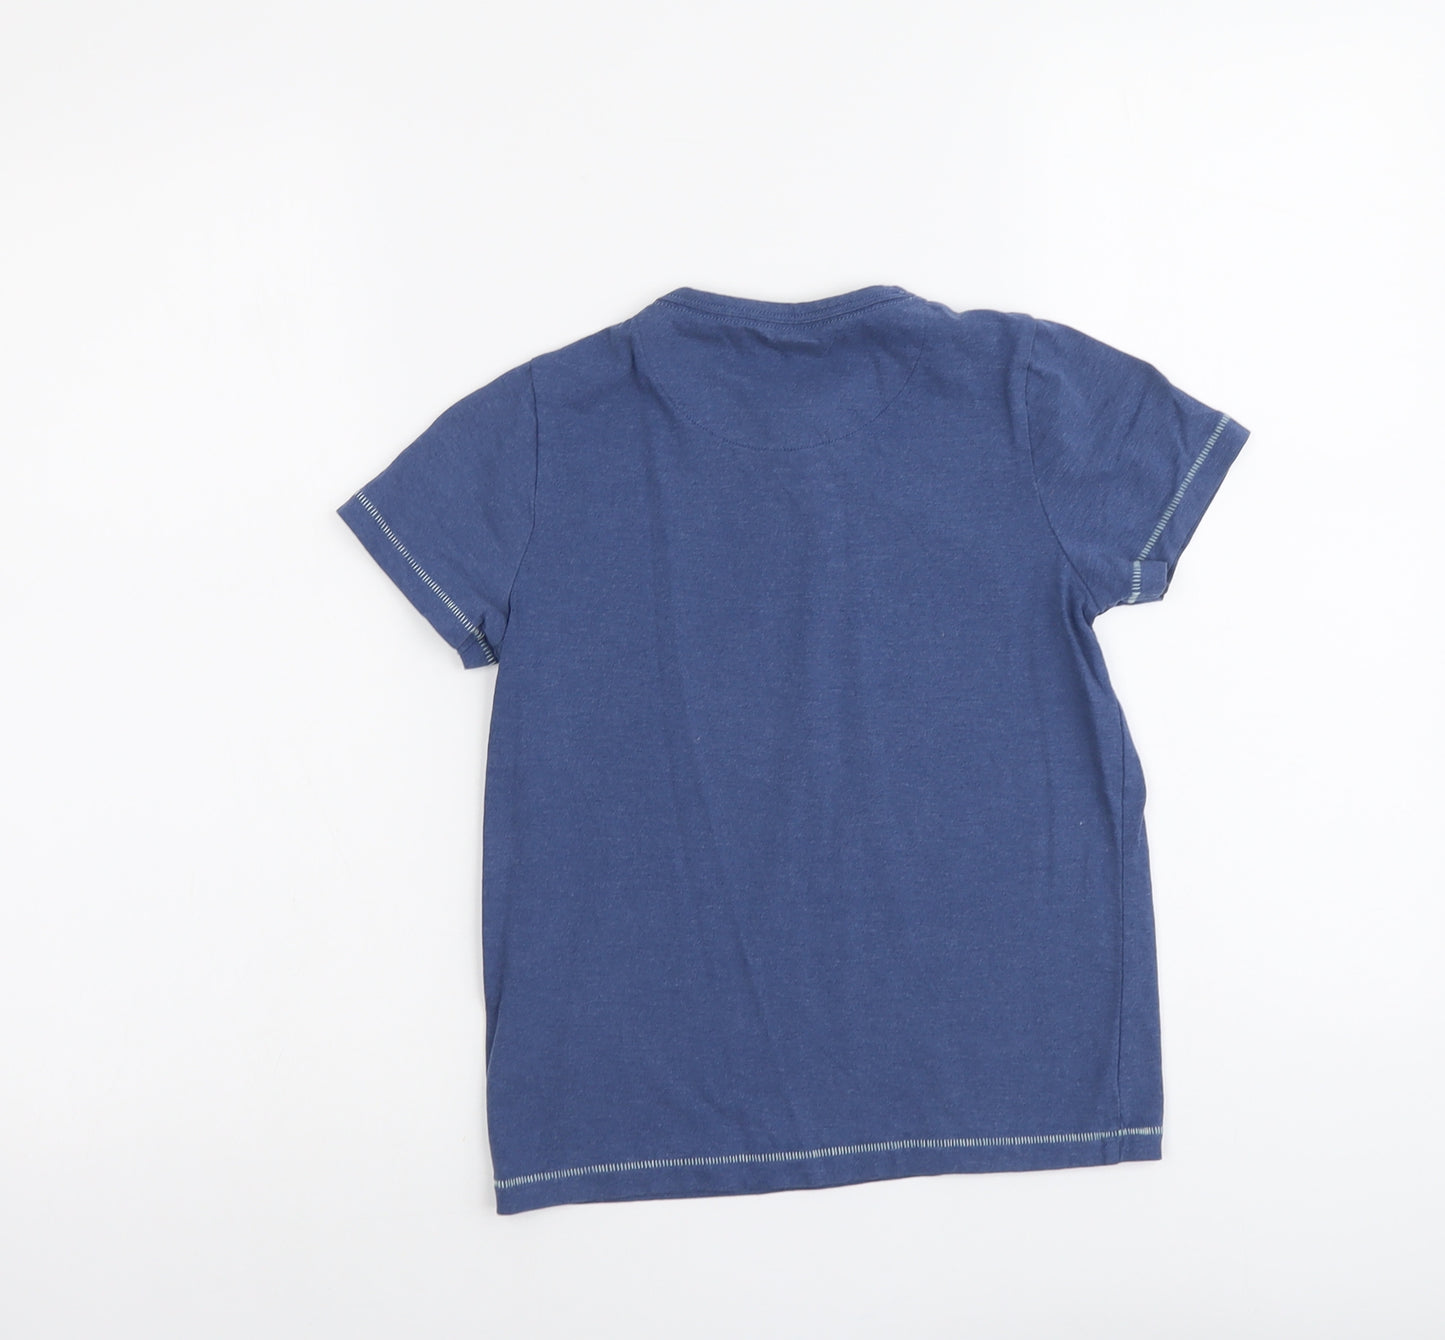 Marks and Spencer Boys Blue Cotton Basic T-Shirt Size 8-9 Years Henley Pullover